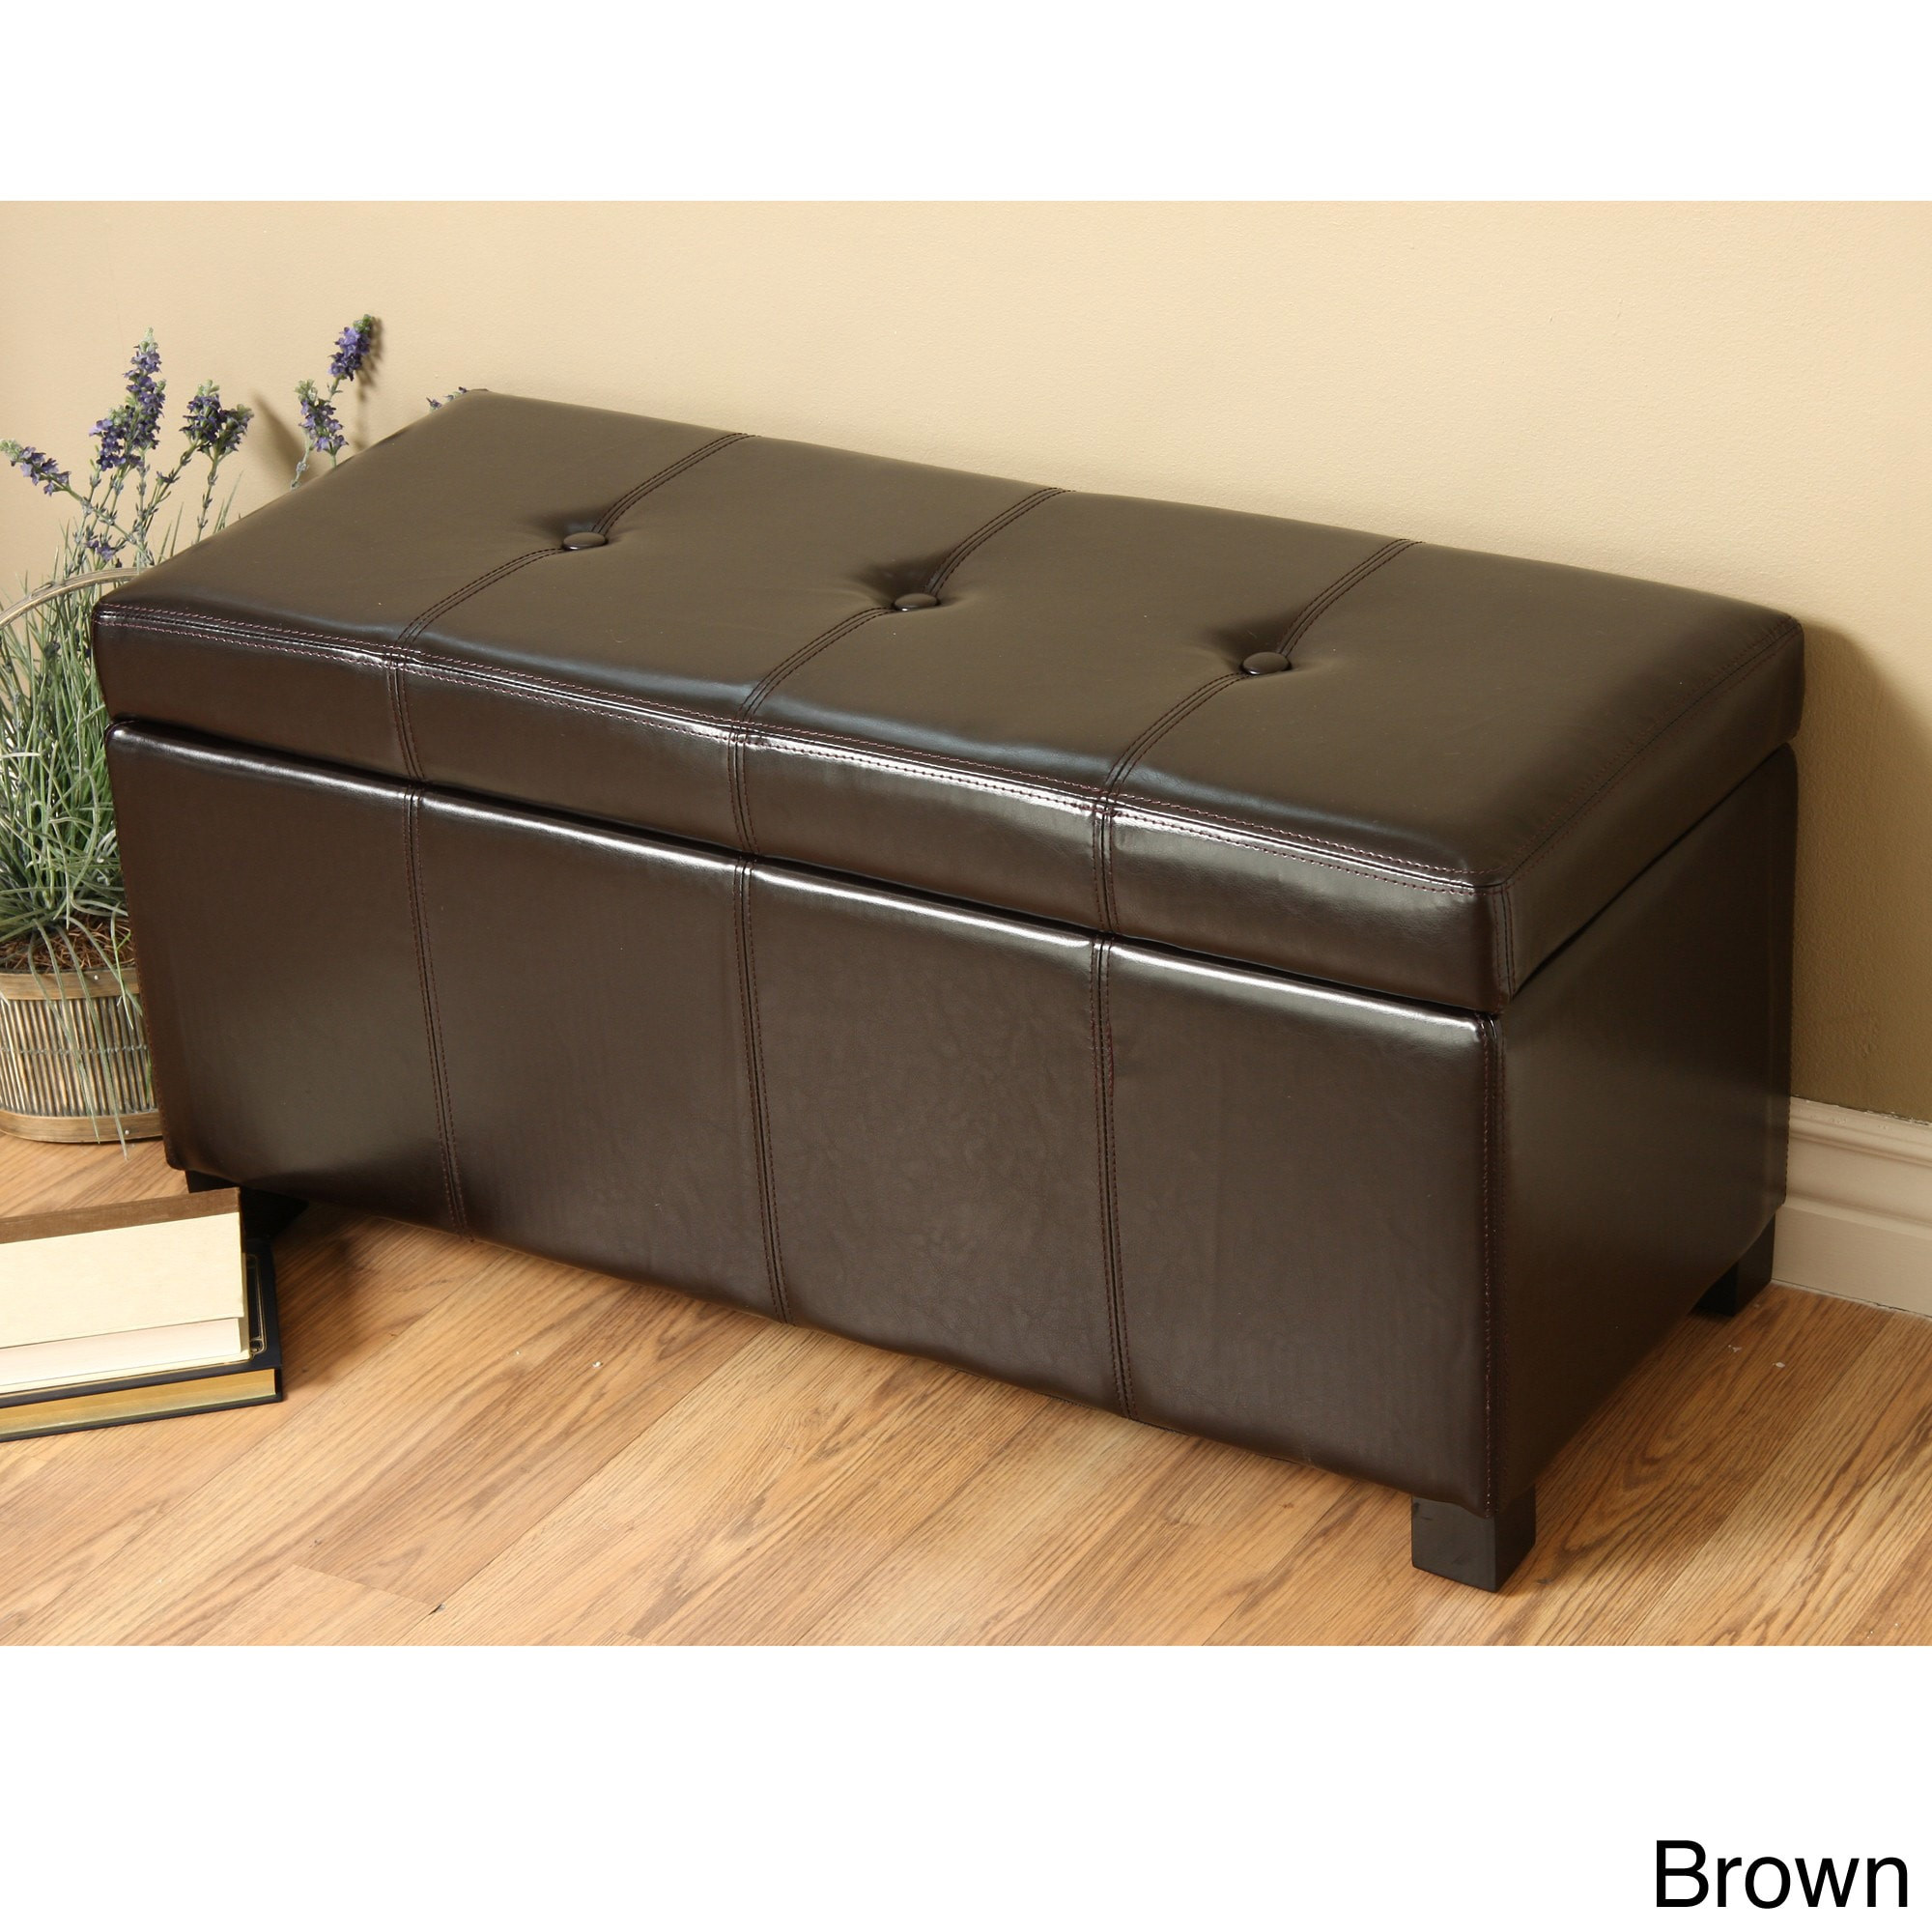 Leather Bench With Storage
 New Modern Faux Leather Storage Bench Living Room Accent